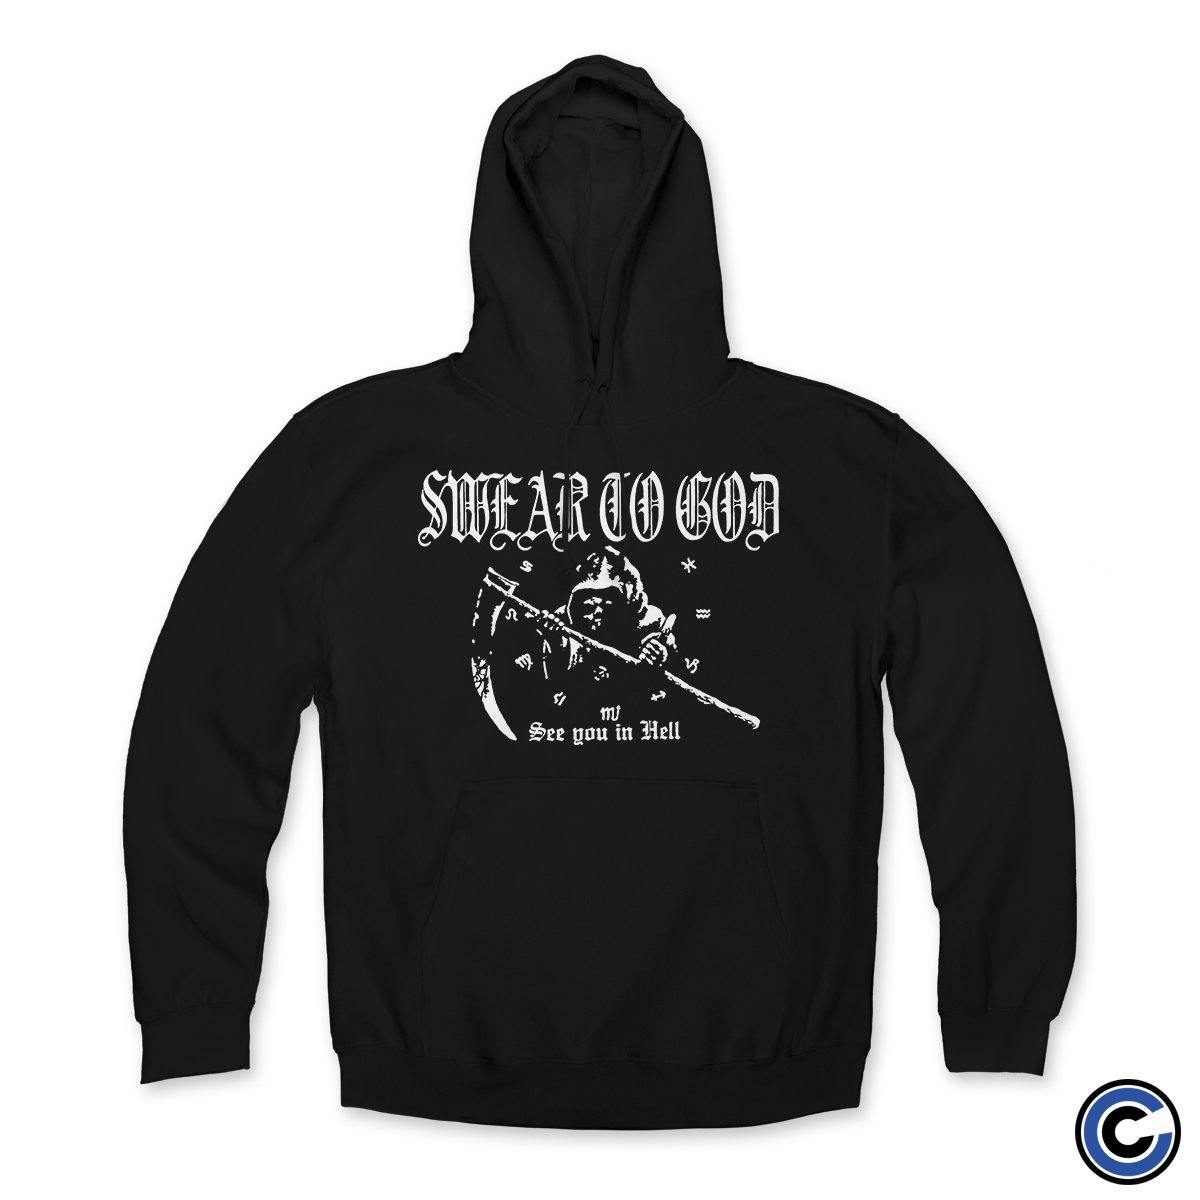 Buy – Swear to God "See You In Hell" Hoodie – Band & Music Merch – Cold Cuts Merch